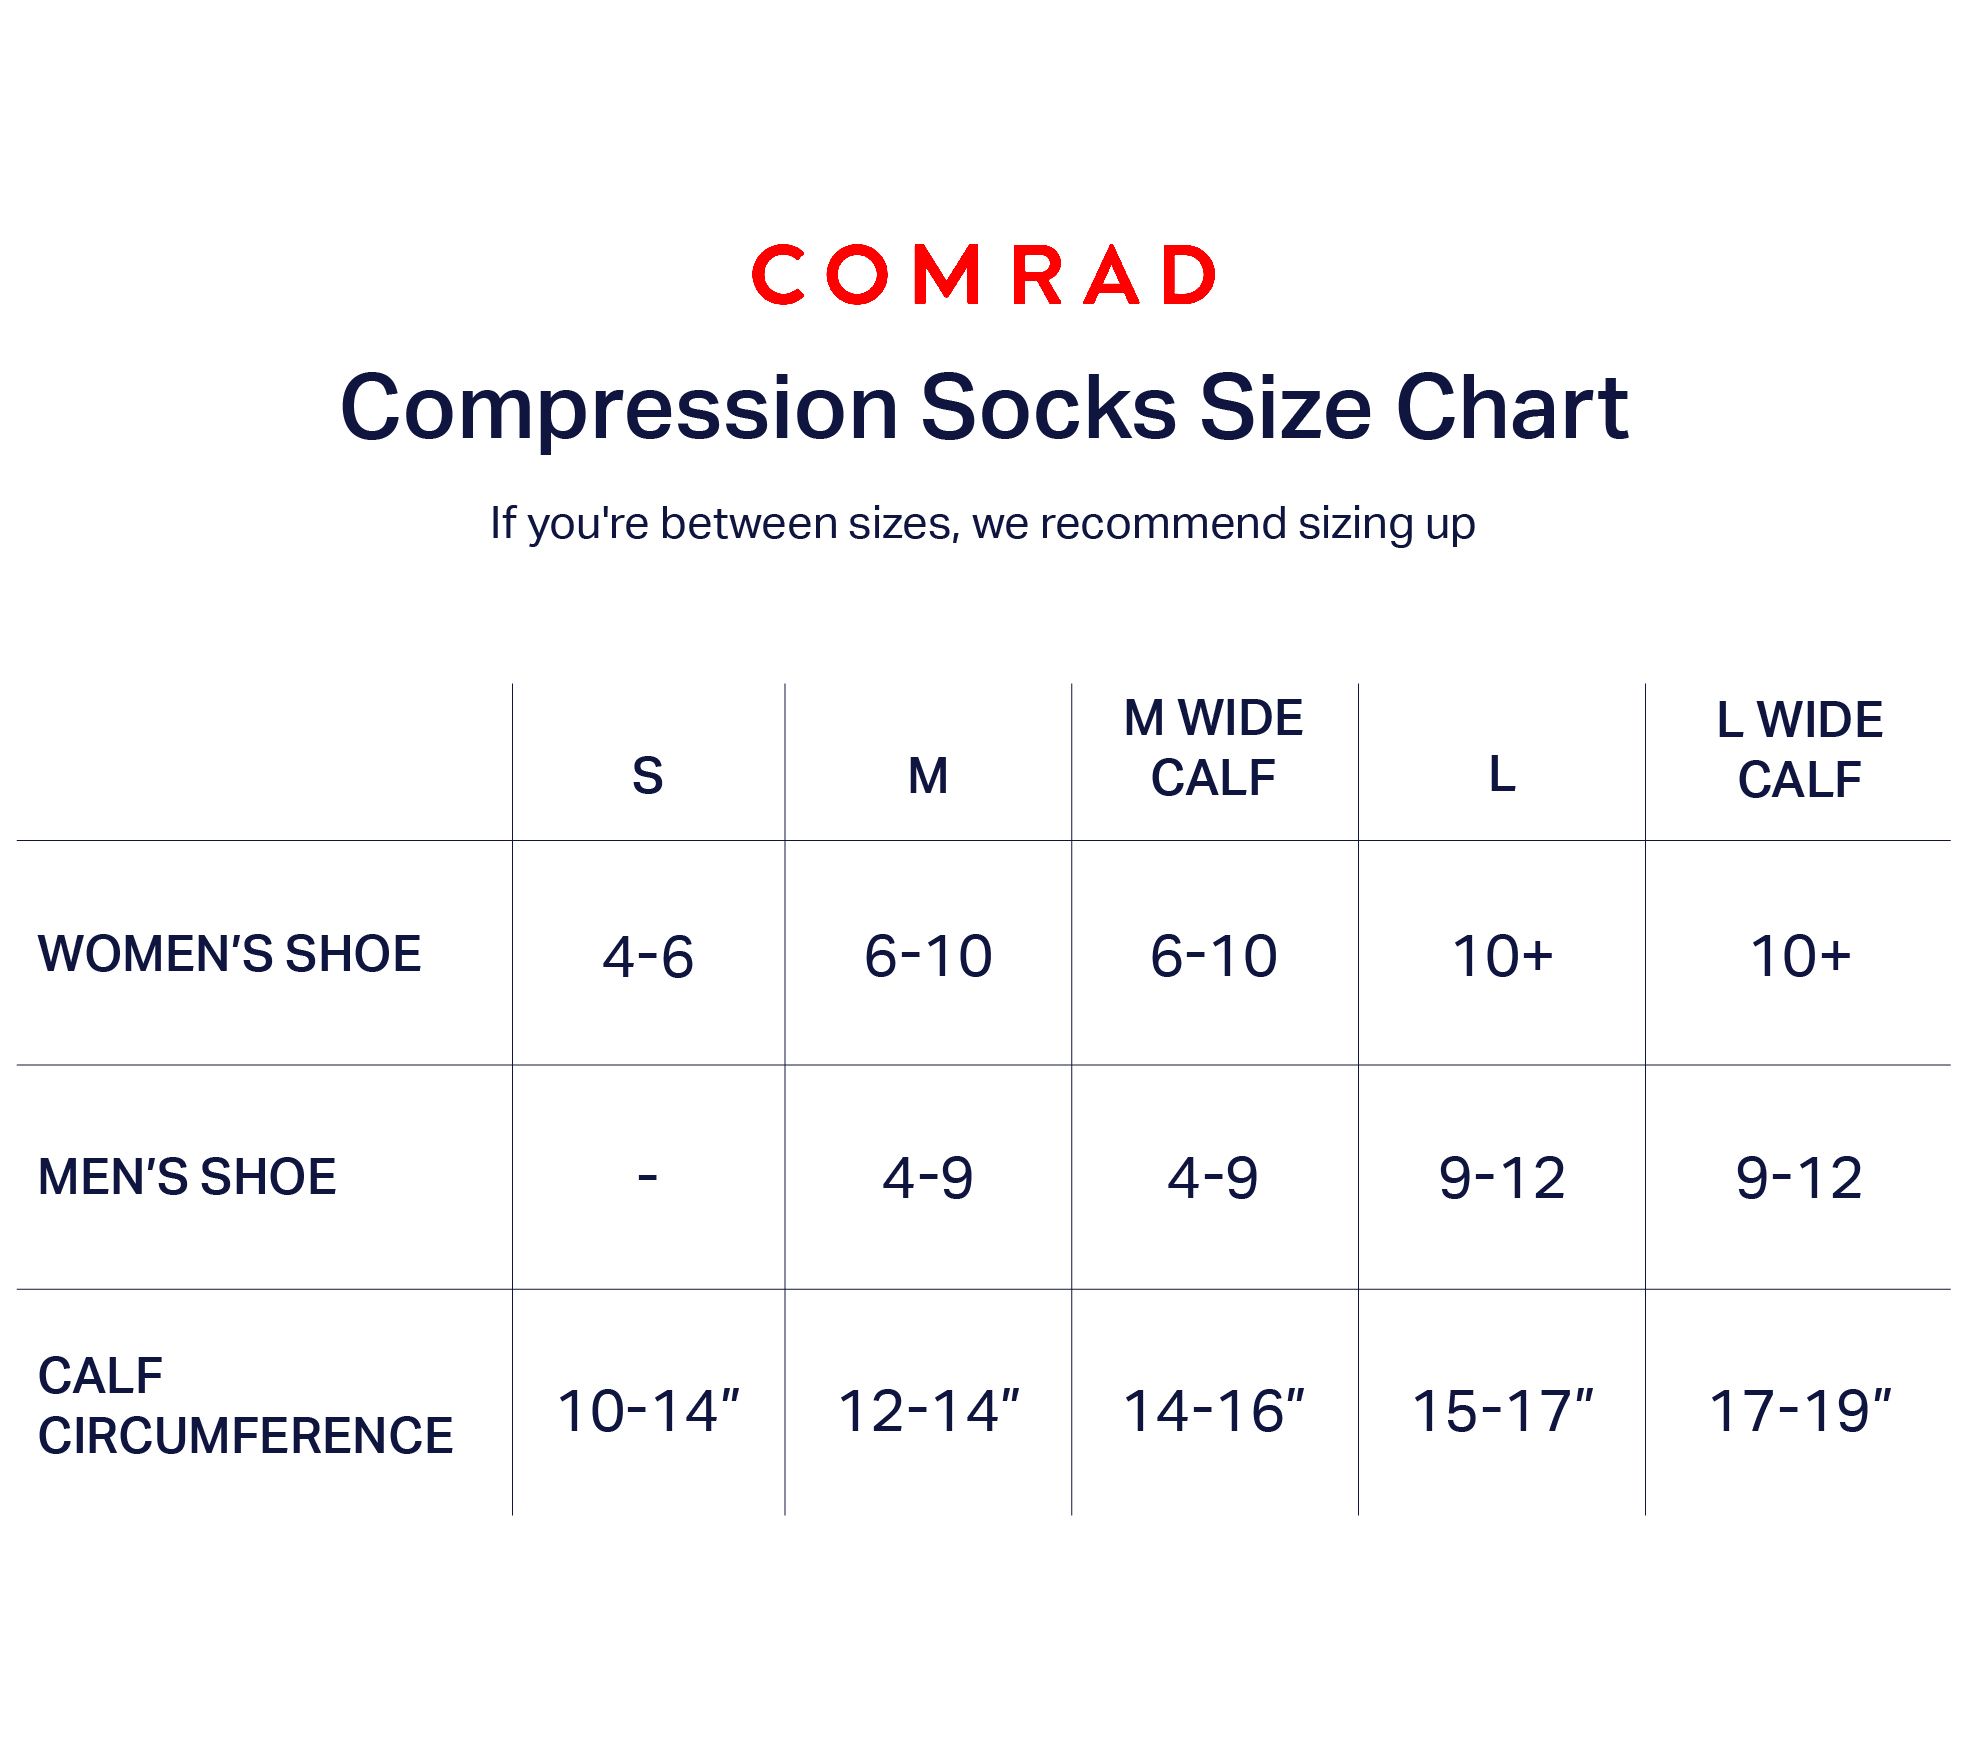 How To Wash Your Compression Stockings - Heritage Park Laundry